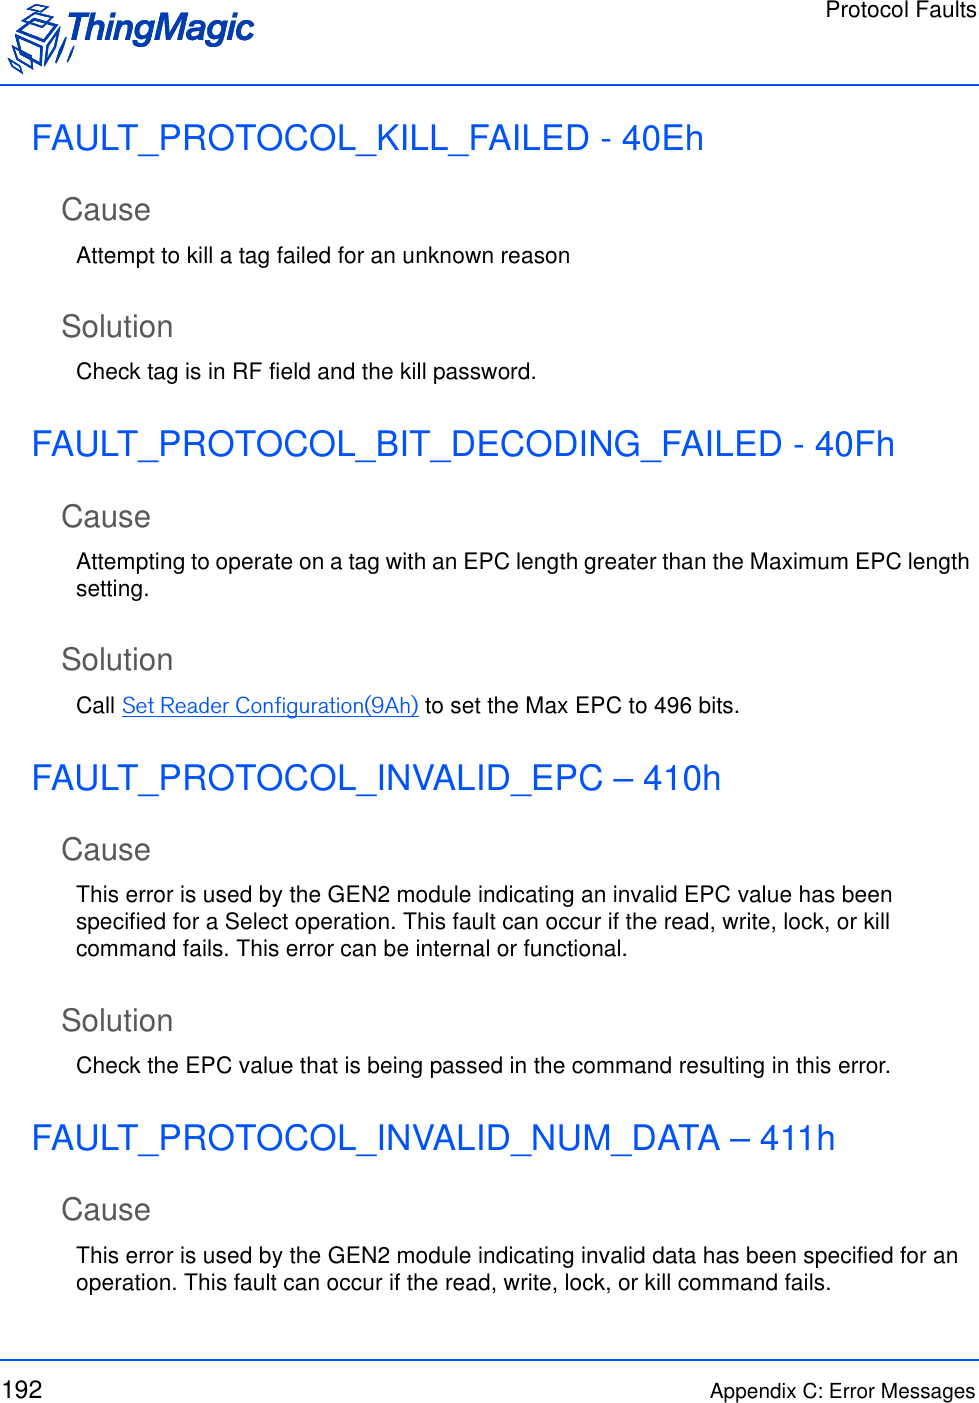 Protocol Faults192 Appendix C: Error MessagesFAULT_PROTOCOL_KILL_FAILED - 40EhCauseAttempt to kill a tag failed for an unknown reasonSolutionCheck tag is in RF field and the kill password.FAULT_PROTOCOL_BIT_DECODING_FAILED - 40FhCauseAttempting to operate on a tag with an EPC length greater than the Maximum EPC length setting.SolutionCall Set Reader Configuration(9Ah) to set the Max EPC to 496 bits.FAULT_PROTOCOL_INVALID_EPC – 410hCauseThis error is used by the GEN2 module indicating an invalid EPC value has been specified for a Select operation. This fault can occur if the read, write, lock, or kill command fails. This error can be internal or functional.SolutionCheck the EPC value that is being passed in the command resulting in this error.FAULT_PROTOCOL_INVALID_NUM_DATA – 411hCauseThis error is used by the GEN2 module indicating invalid data has been specified for an operation. This fault can occur if the read, write, lock, or kill command fails. 